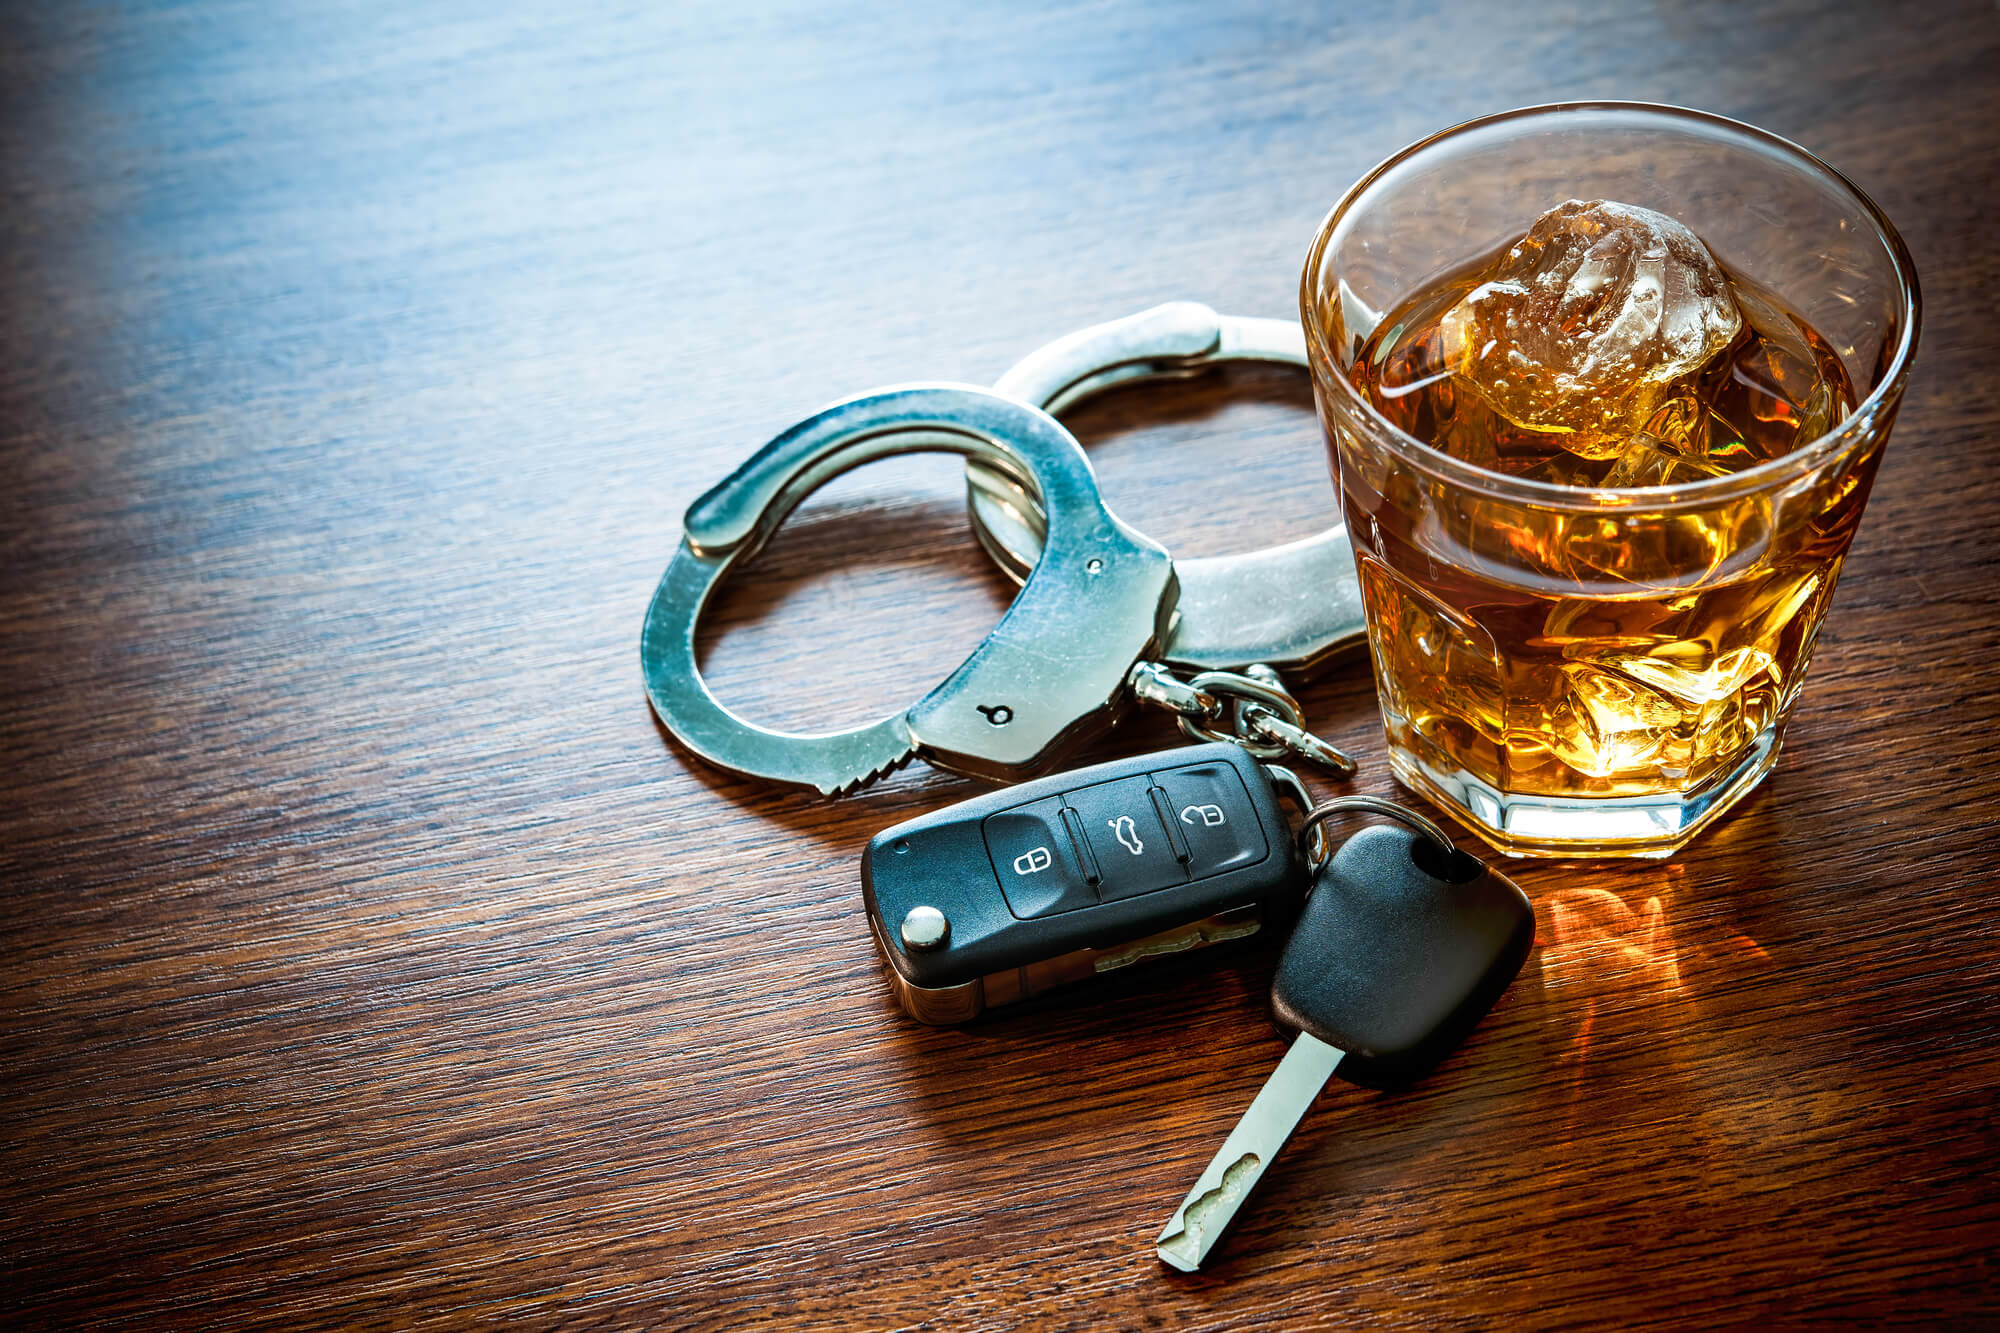 What Should You Know About Getting a DUI